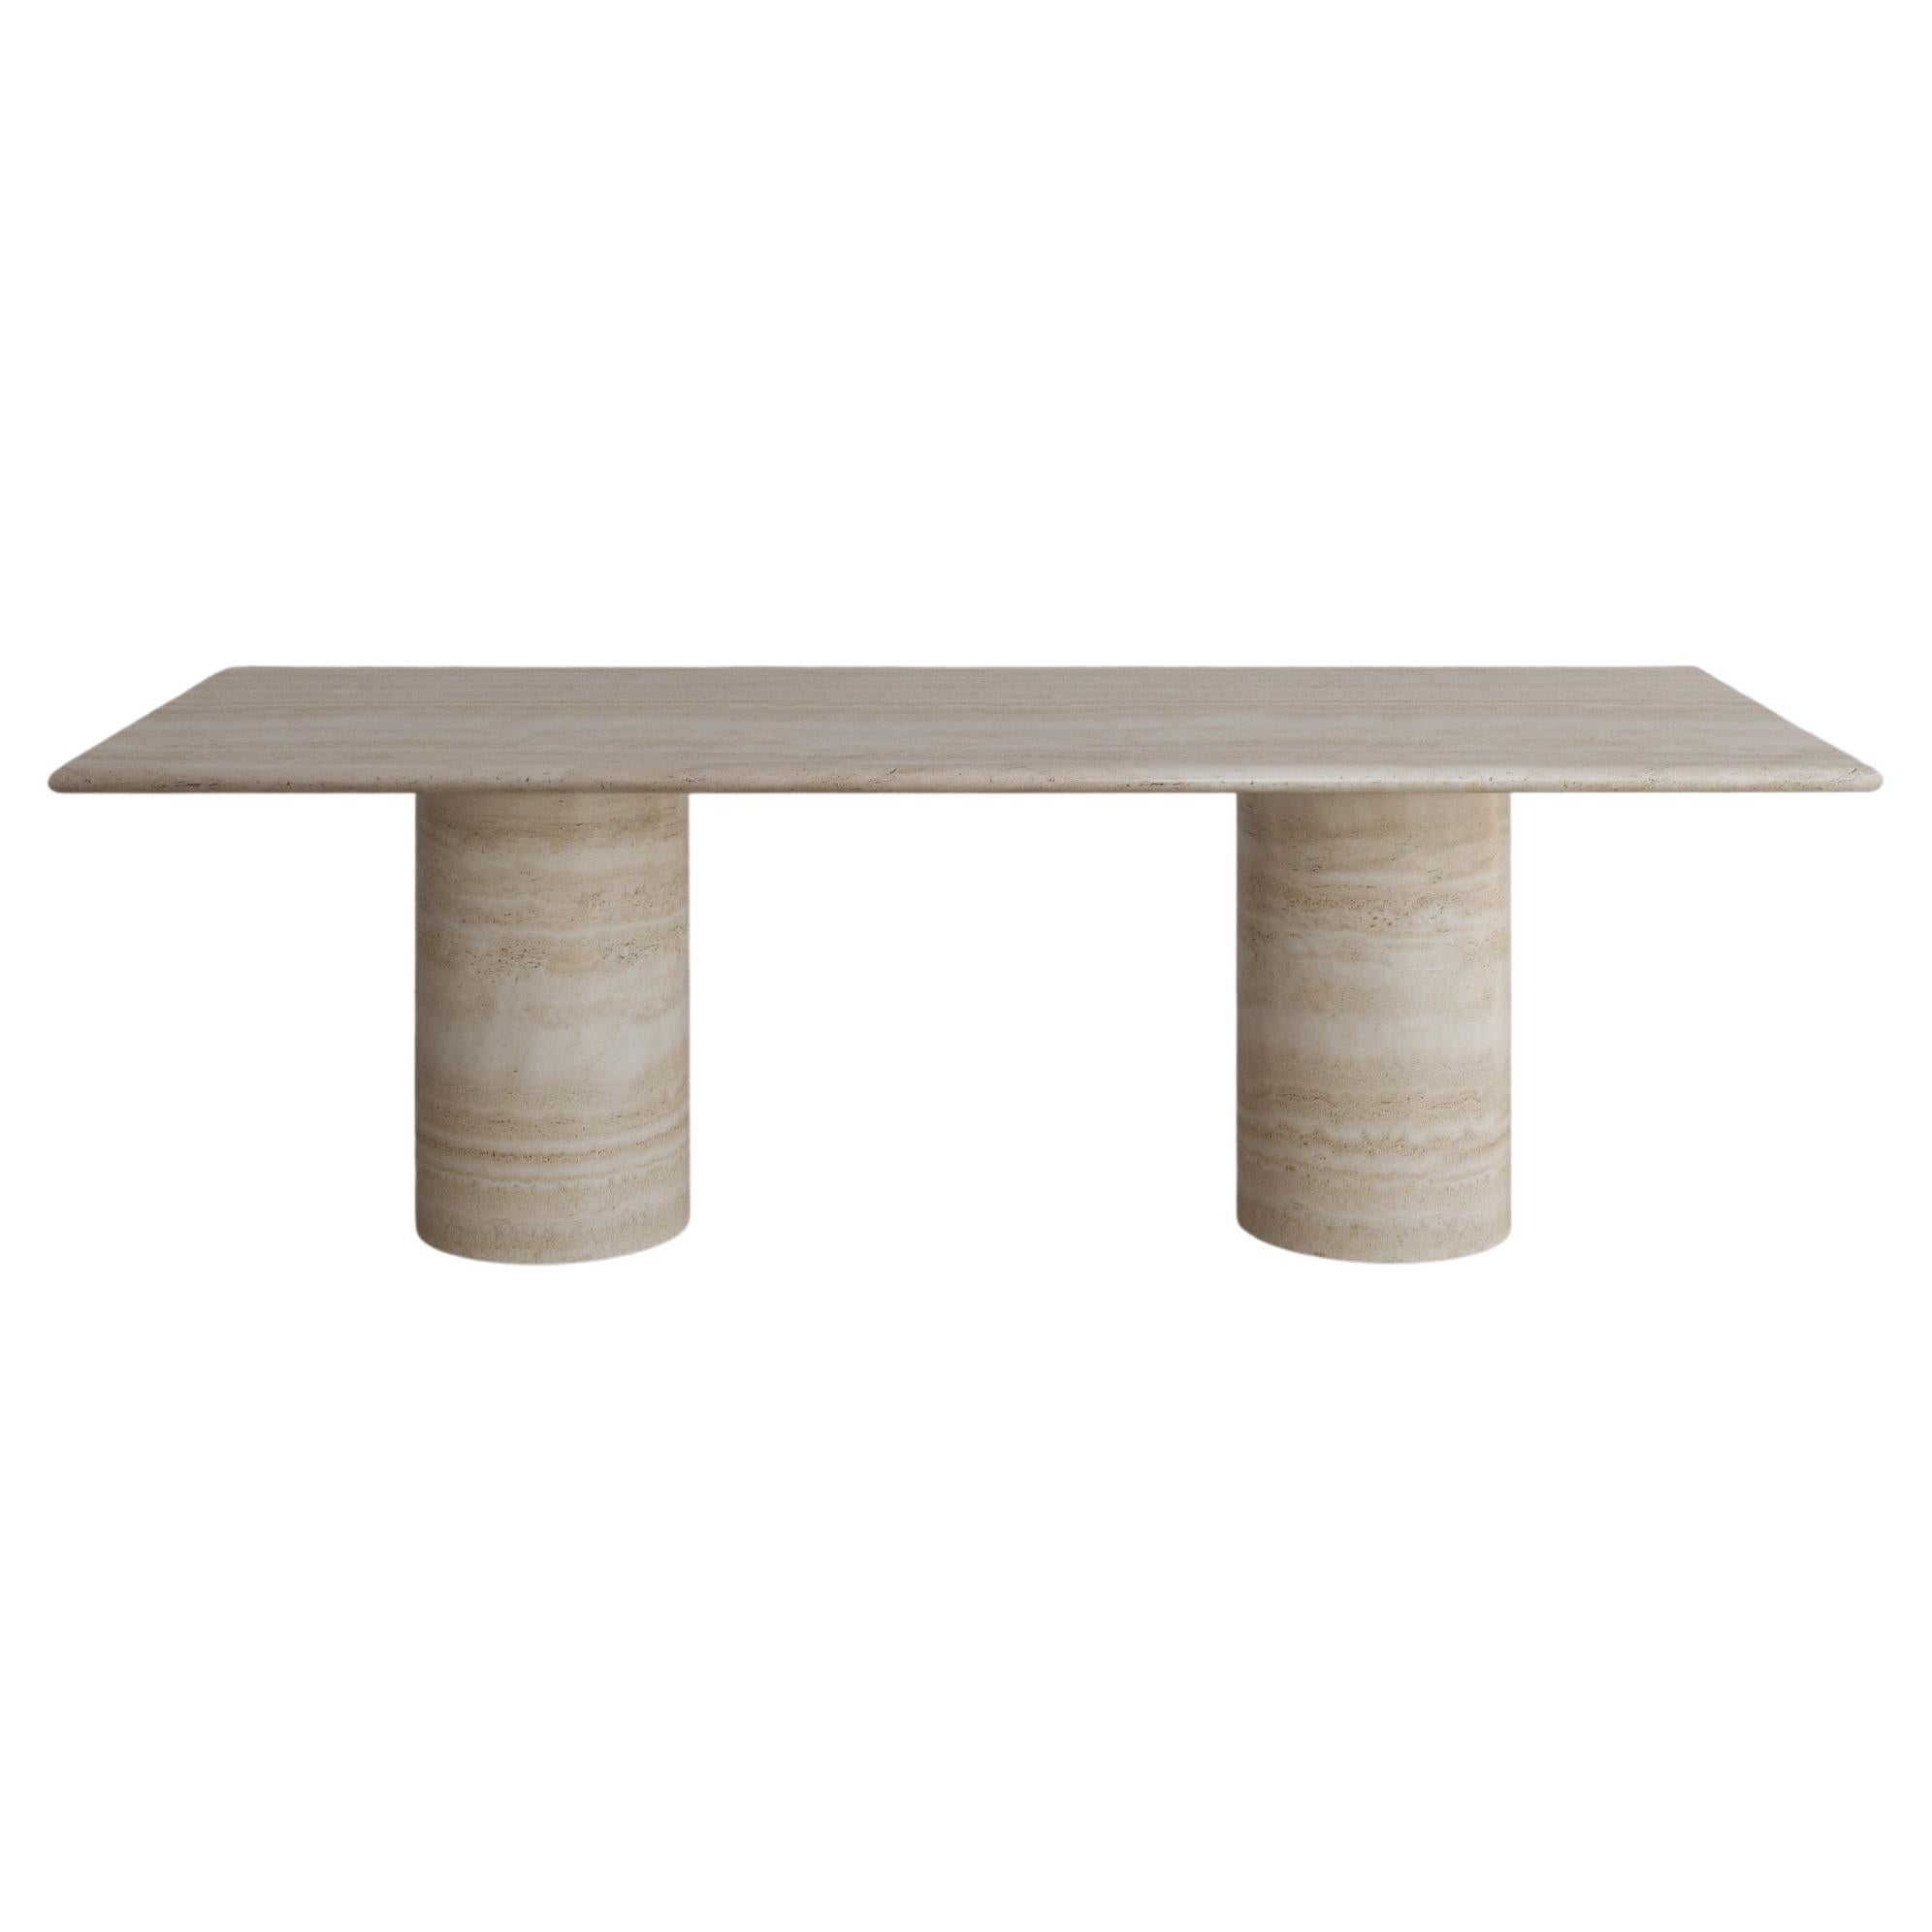 Nude Travertine Voyage Dining Table II by the Essentialist For Sale